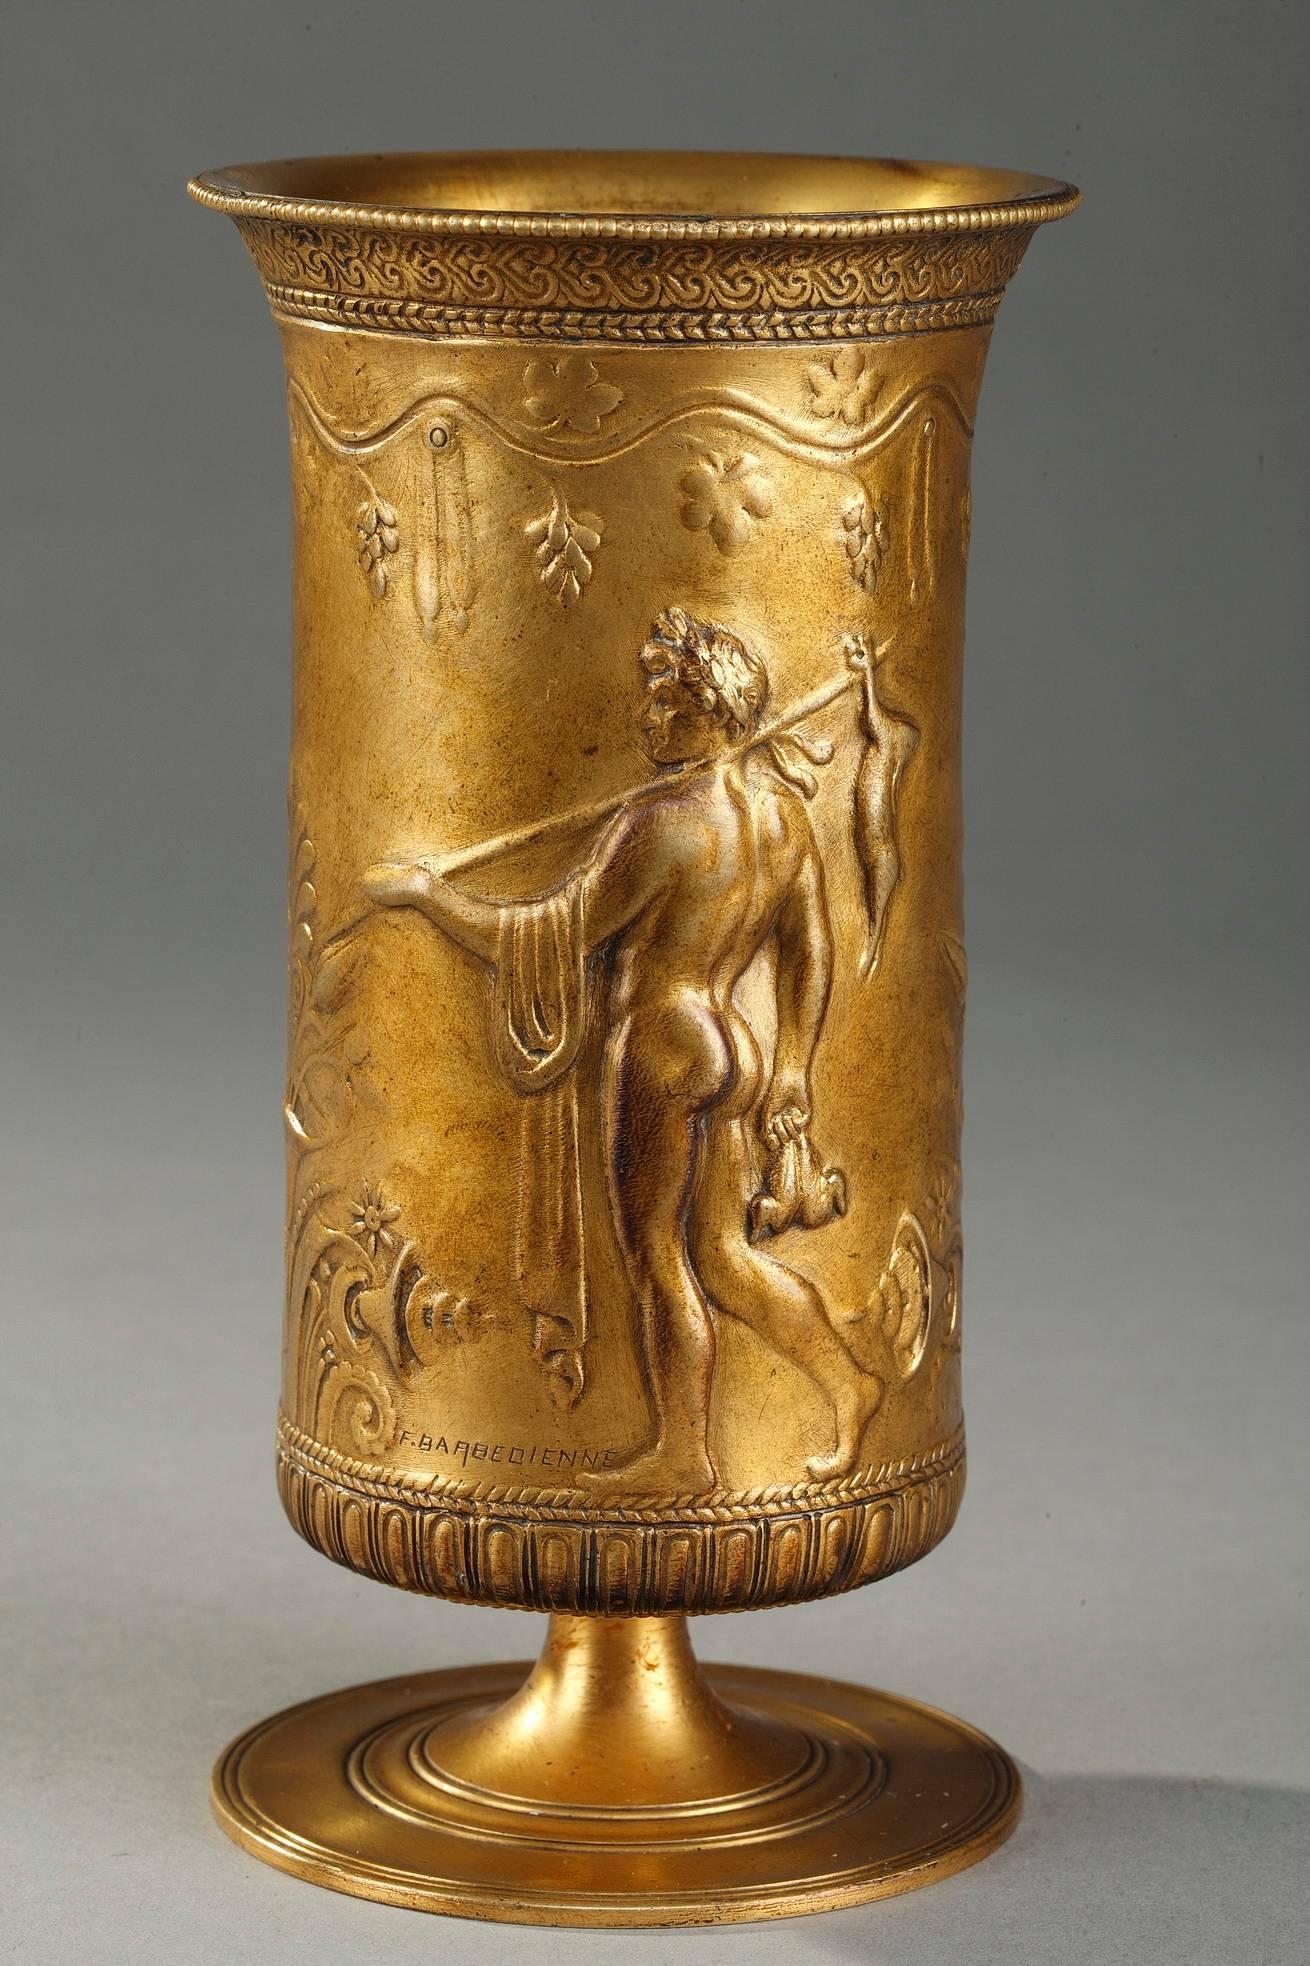 Pair of cylindrical ormolu, or gilt bronze, cups depicting hunting and picking fruits scenes in Classical style. Each neo-Greek cup is decorated with vine leaves, Greek waves, small pearls and ova. Signed F. LEVILLAIN for Ferdinand Levillain